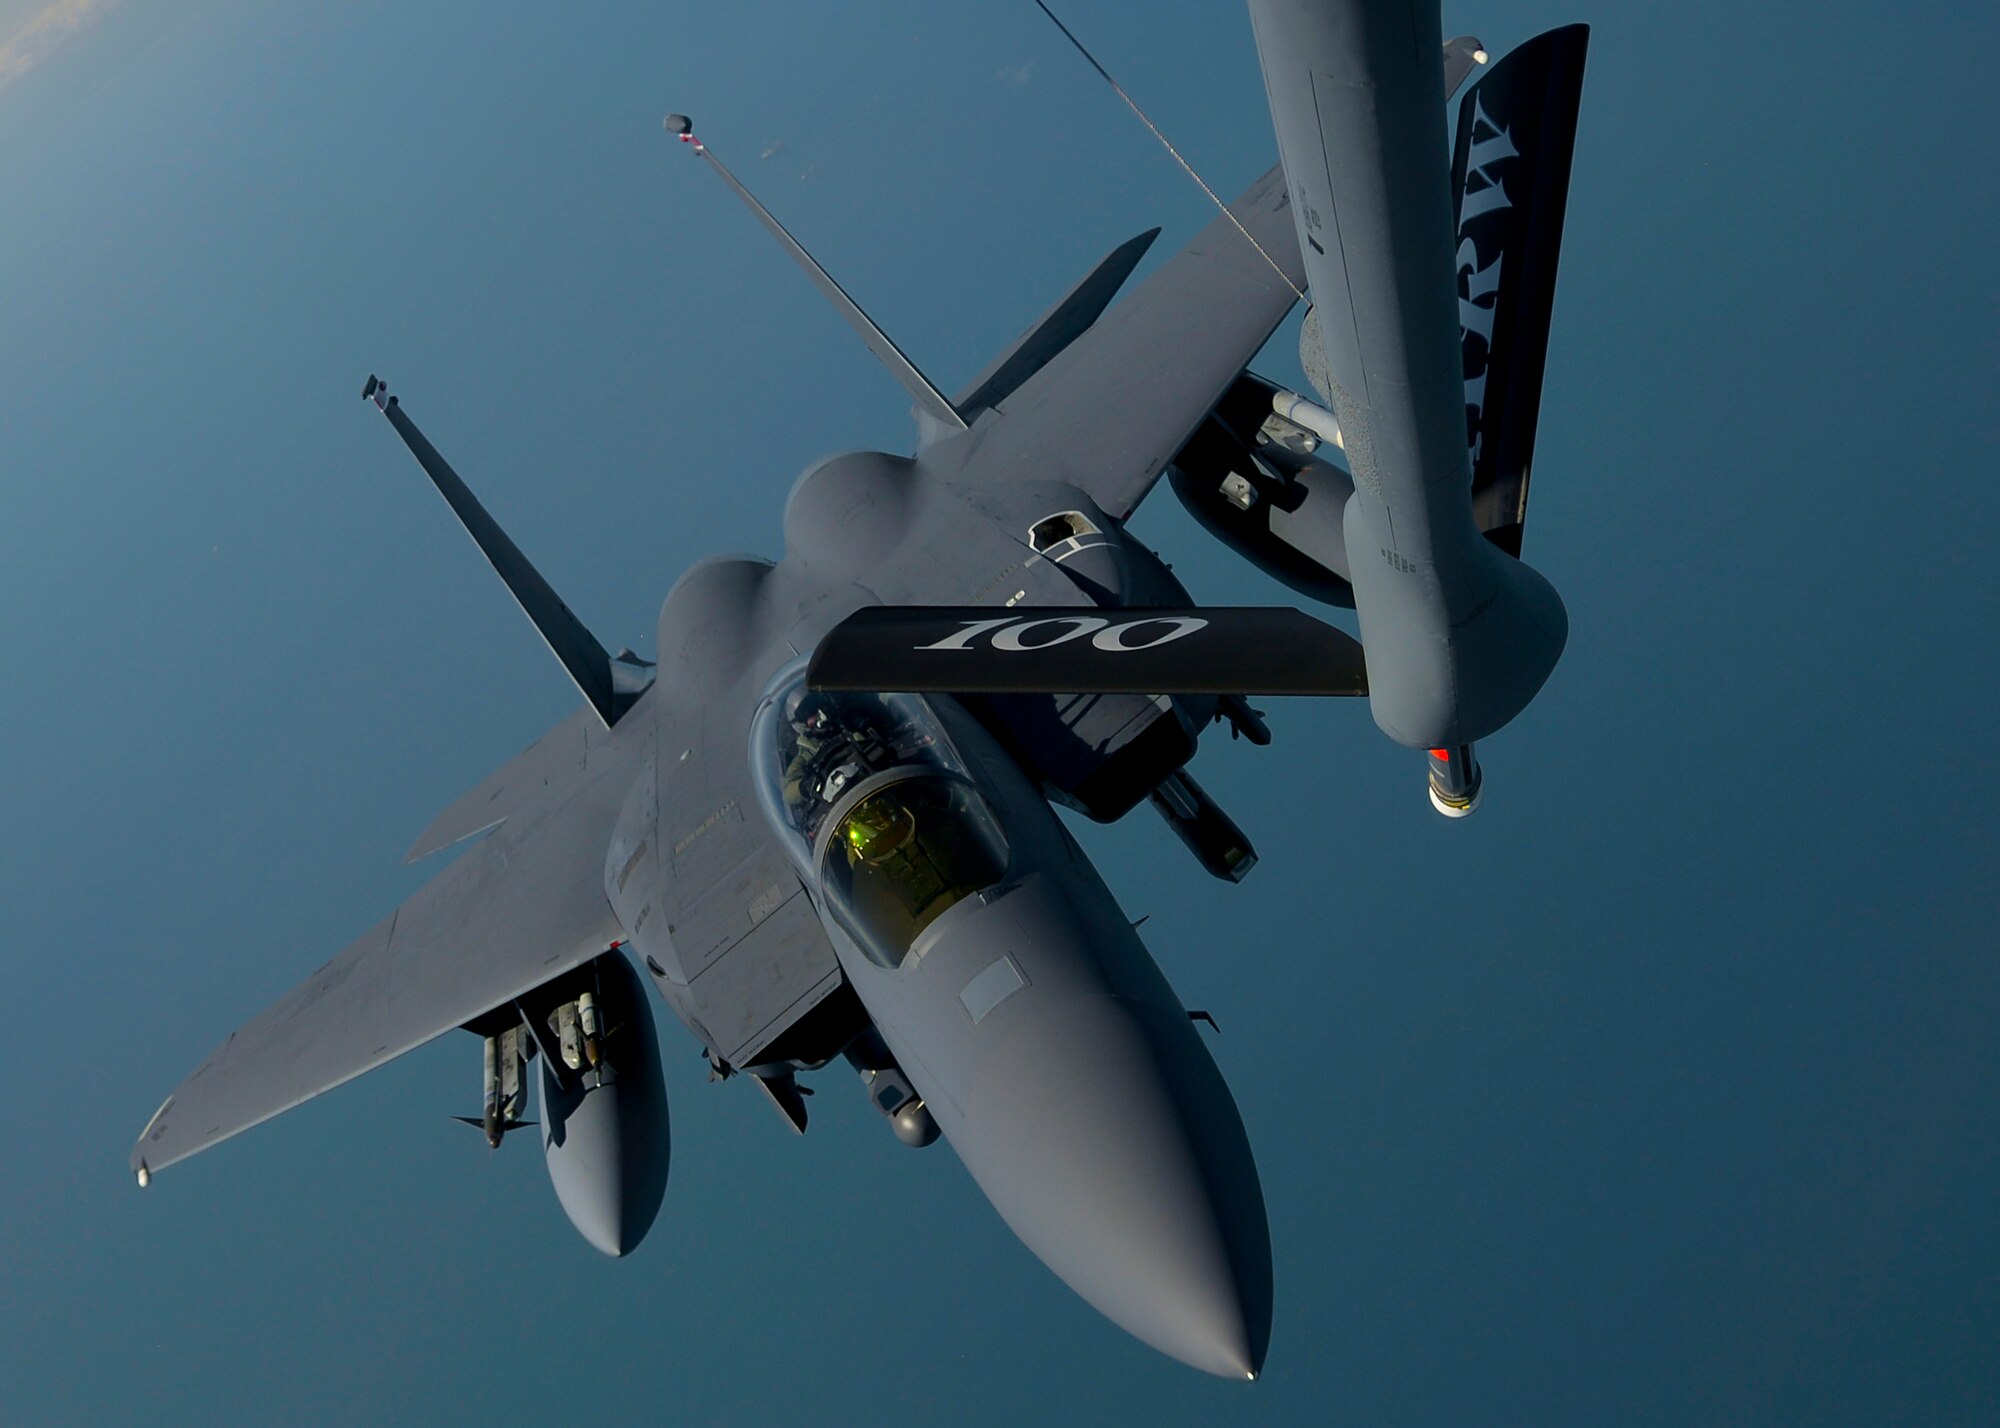 A U.S. Air Force 48th Fighter Wing F-15 Strike Eagle from RAF Lakenheath, England, approaches the boom of a 100th Air Refueling Wing KC-135 Stratotanker assigned to RAF Mildenhall, England April 19, 2016, over the Norfolk Sea. The 48th FW participated in air training drills alongside U.S.A.F. F-22s and other Europe-based aircraft in support of exercise Iron Hand. (U.S. Air Force photo by Senior Airman Victoria H. Taylor/Released)